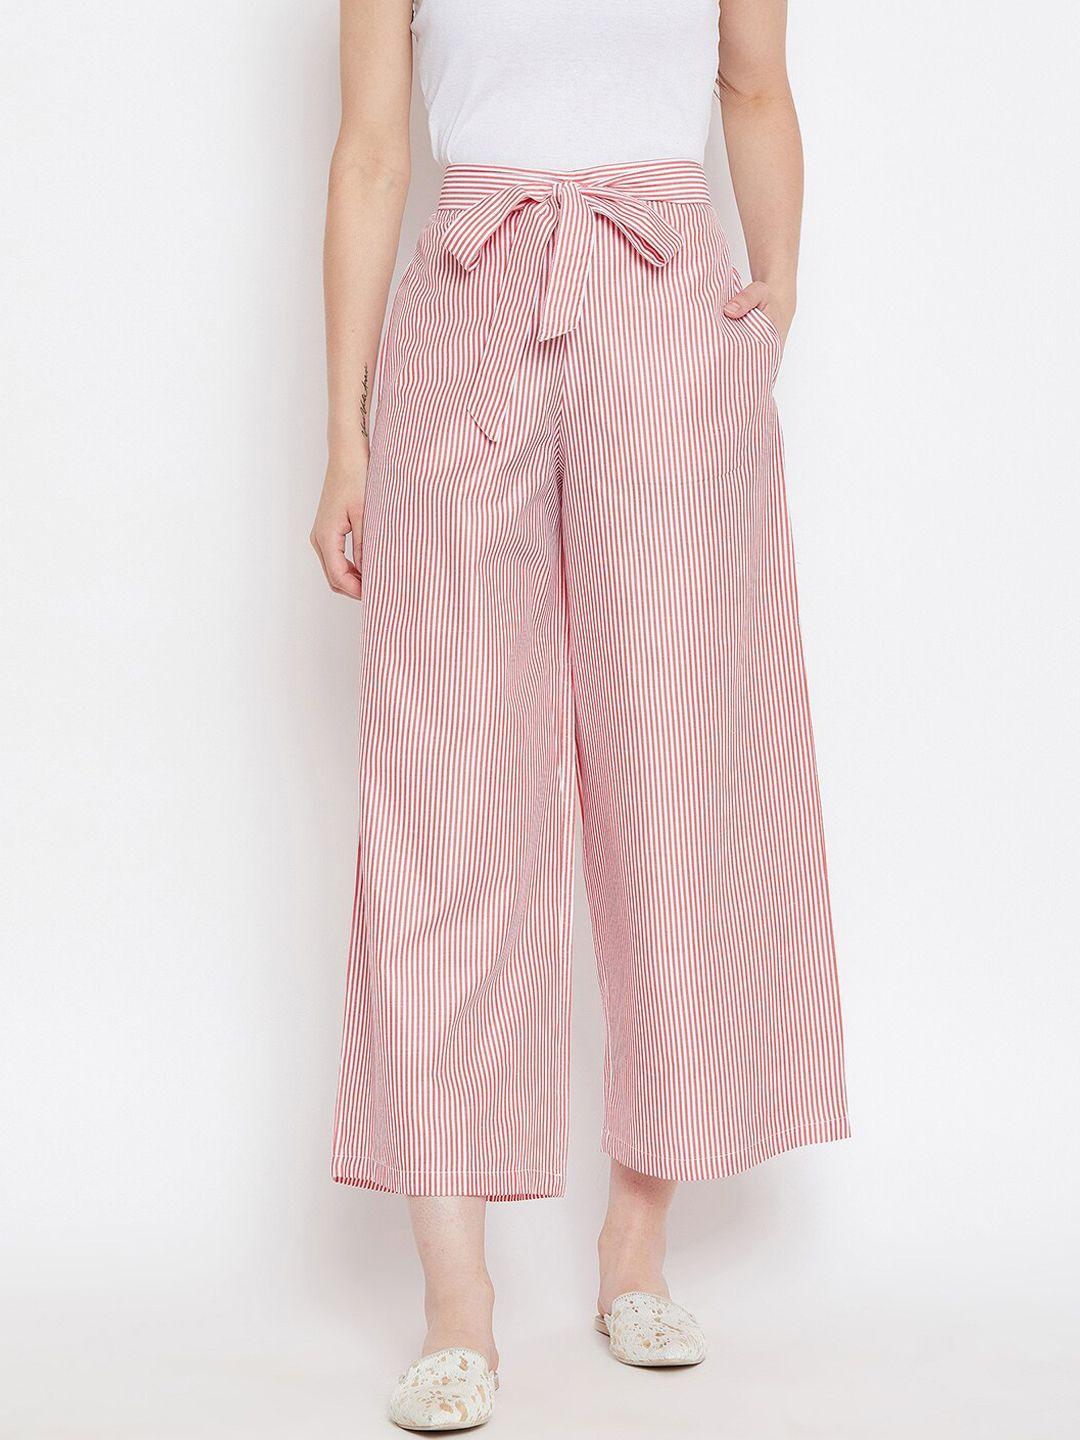 bitterlime-women-red-&-white-striped-relaxed-parallel-trousers